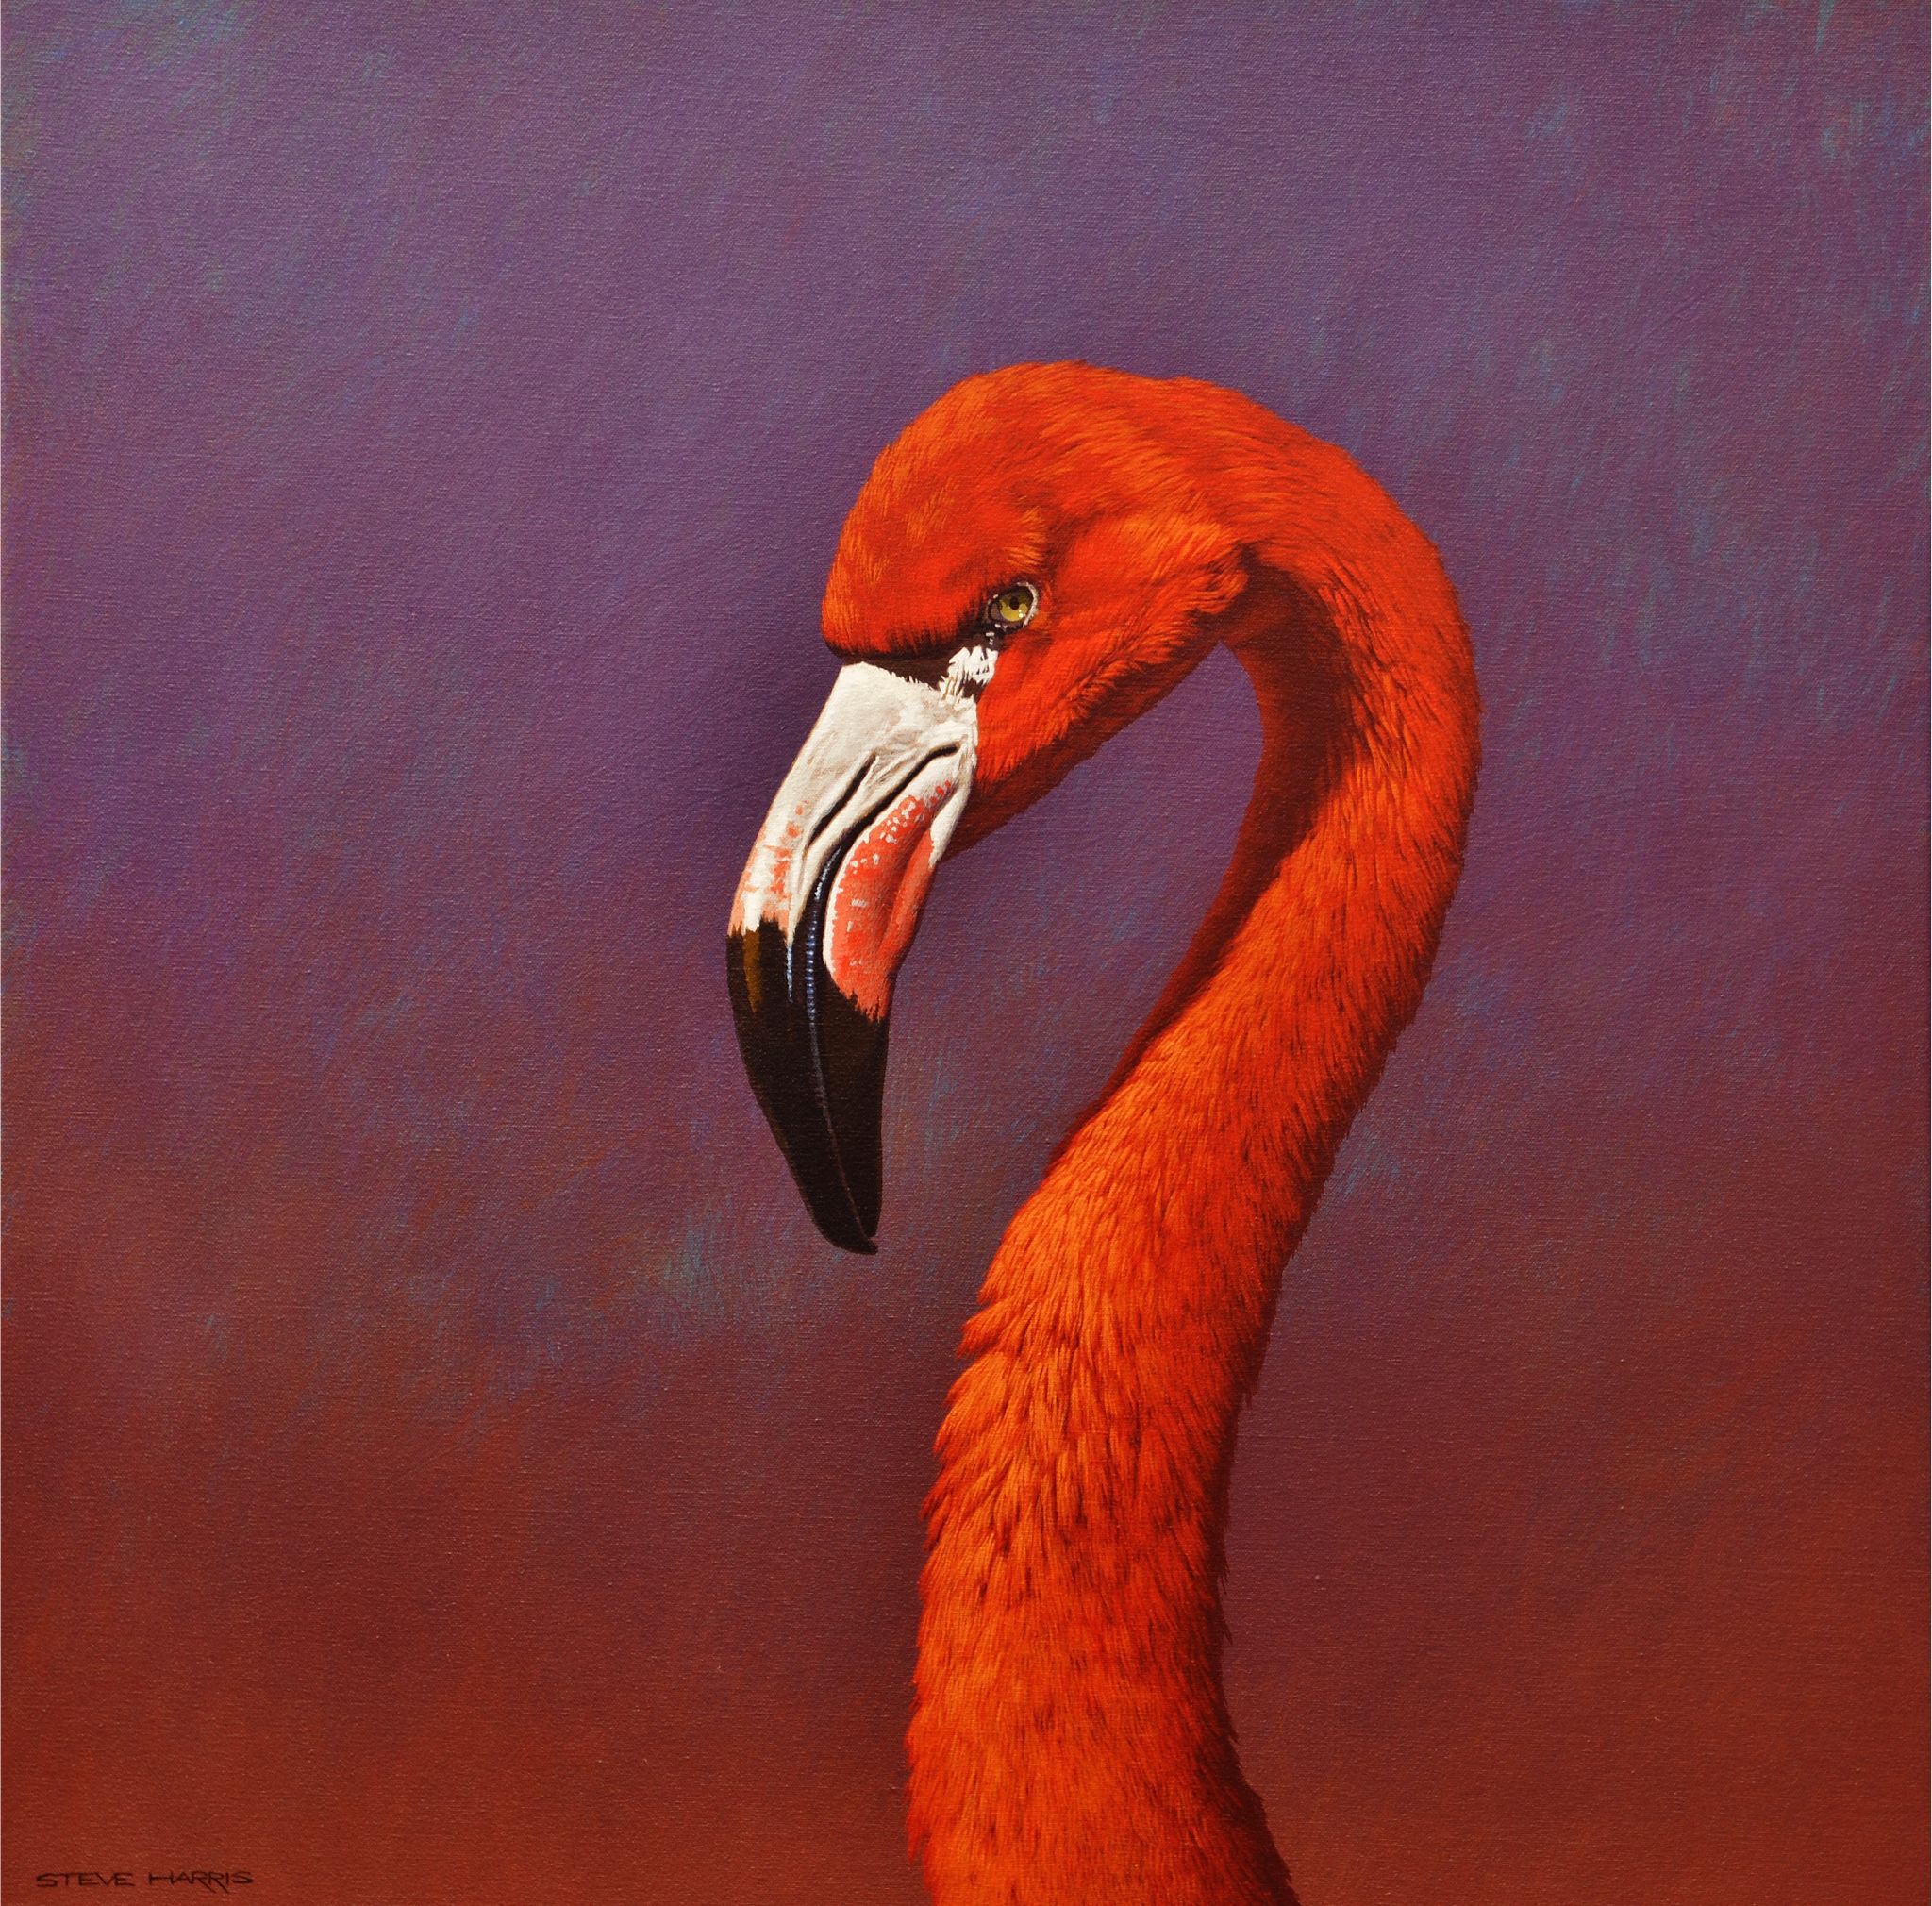 A vibrant acrylic on canvas painting of a flamingo.